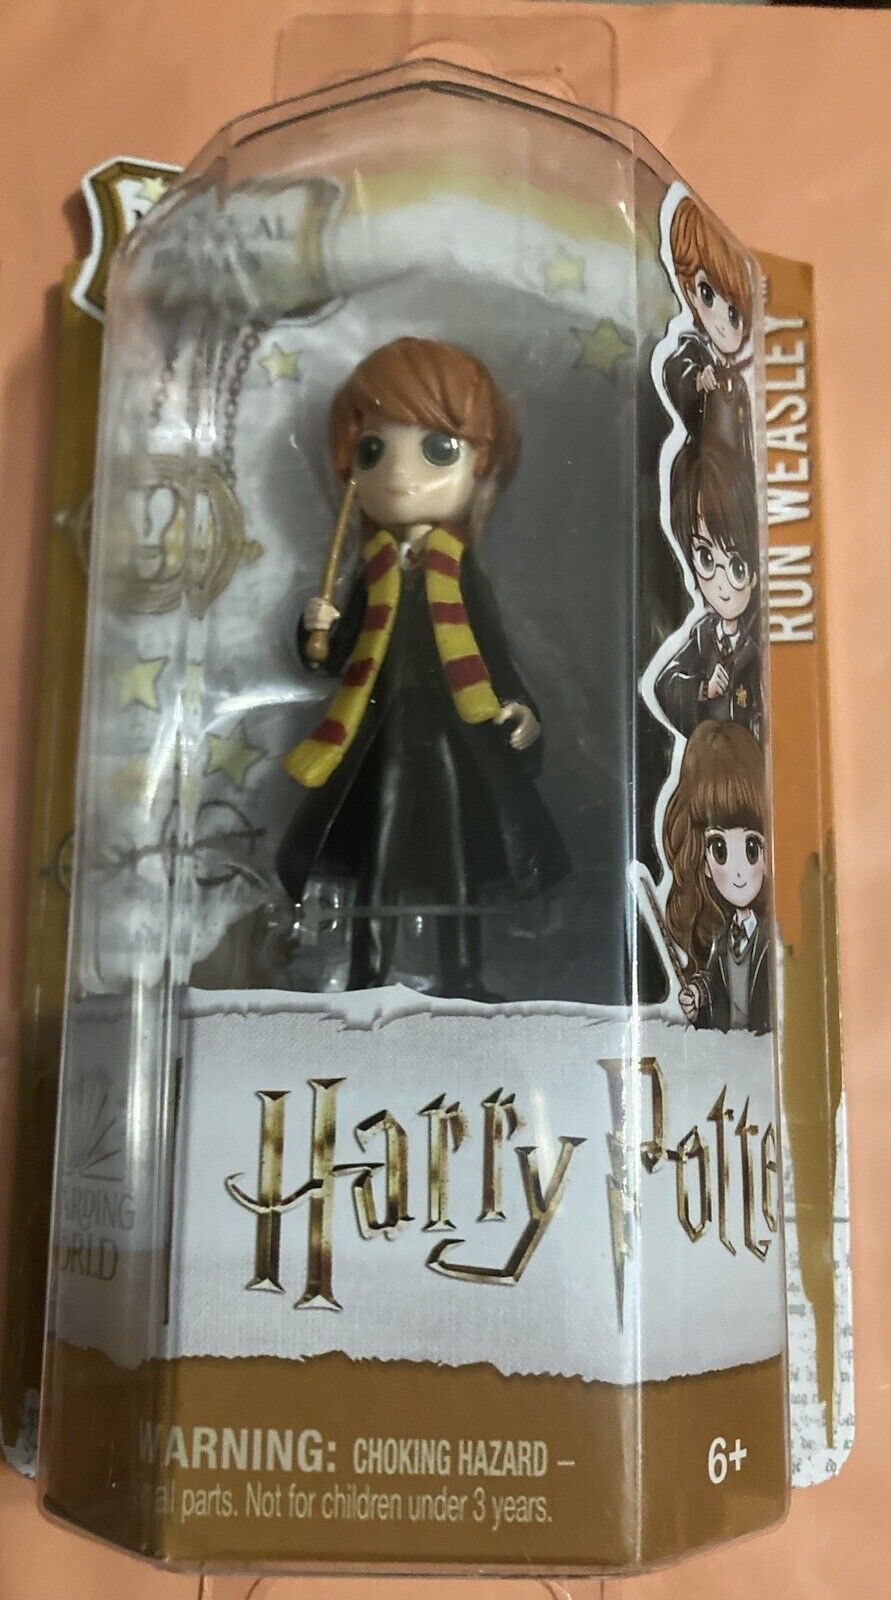 Ron Weasley from Harry Potter -  Spinmaster toy figure (3 inch)